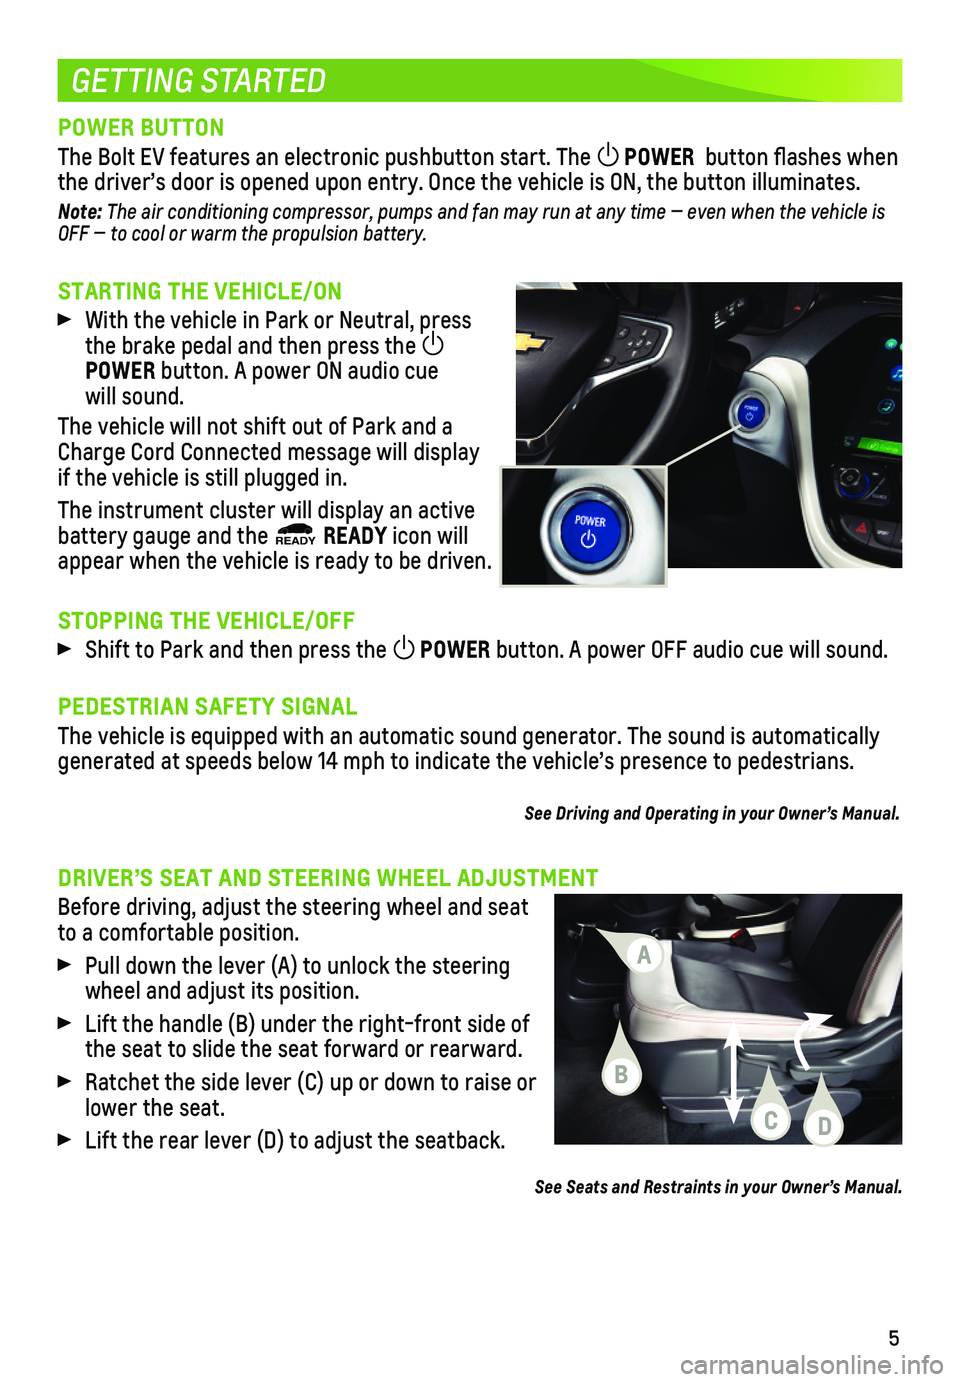 CHEVROLET BOLT EV 2018  Get To Know Guide 5
STARTING THE VEHICLE/ON
 With the vehicle in Park or Neutral, press the brake pedal and then press the POWER button. A power ON audio cue will sound.
The vehicle will not shift out of Park and a Ch